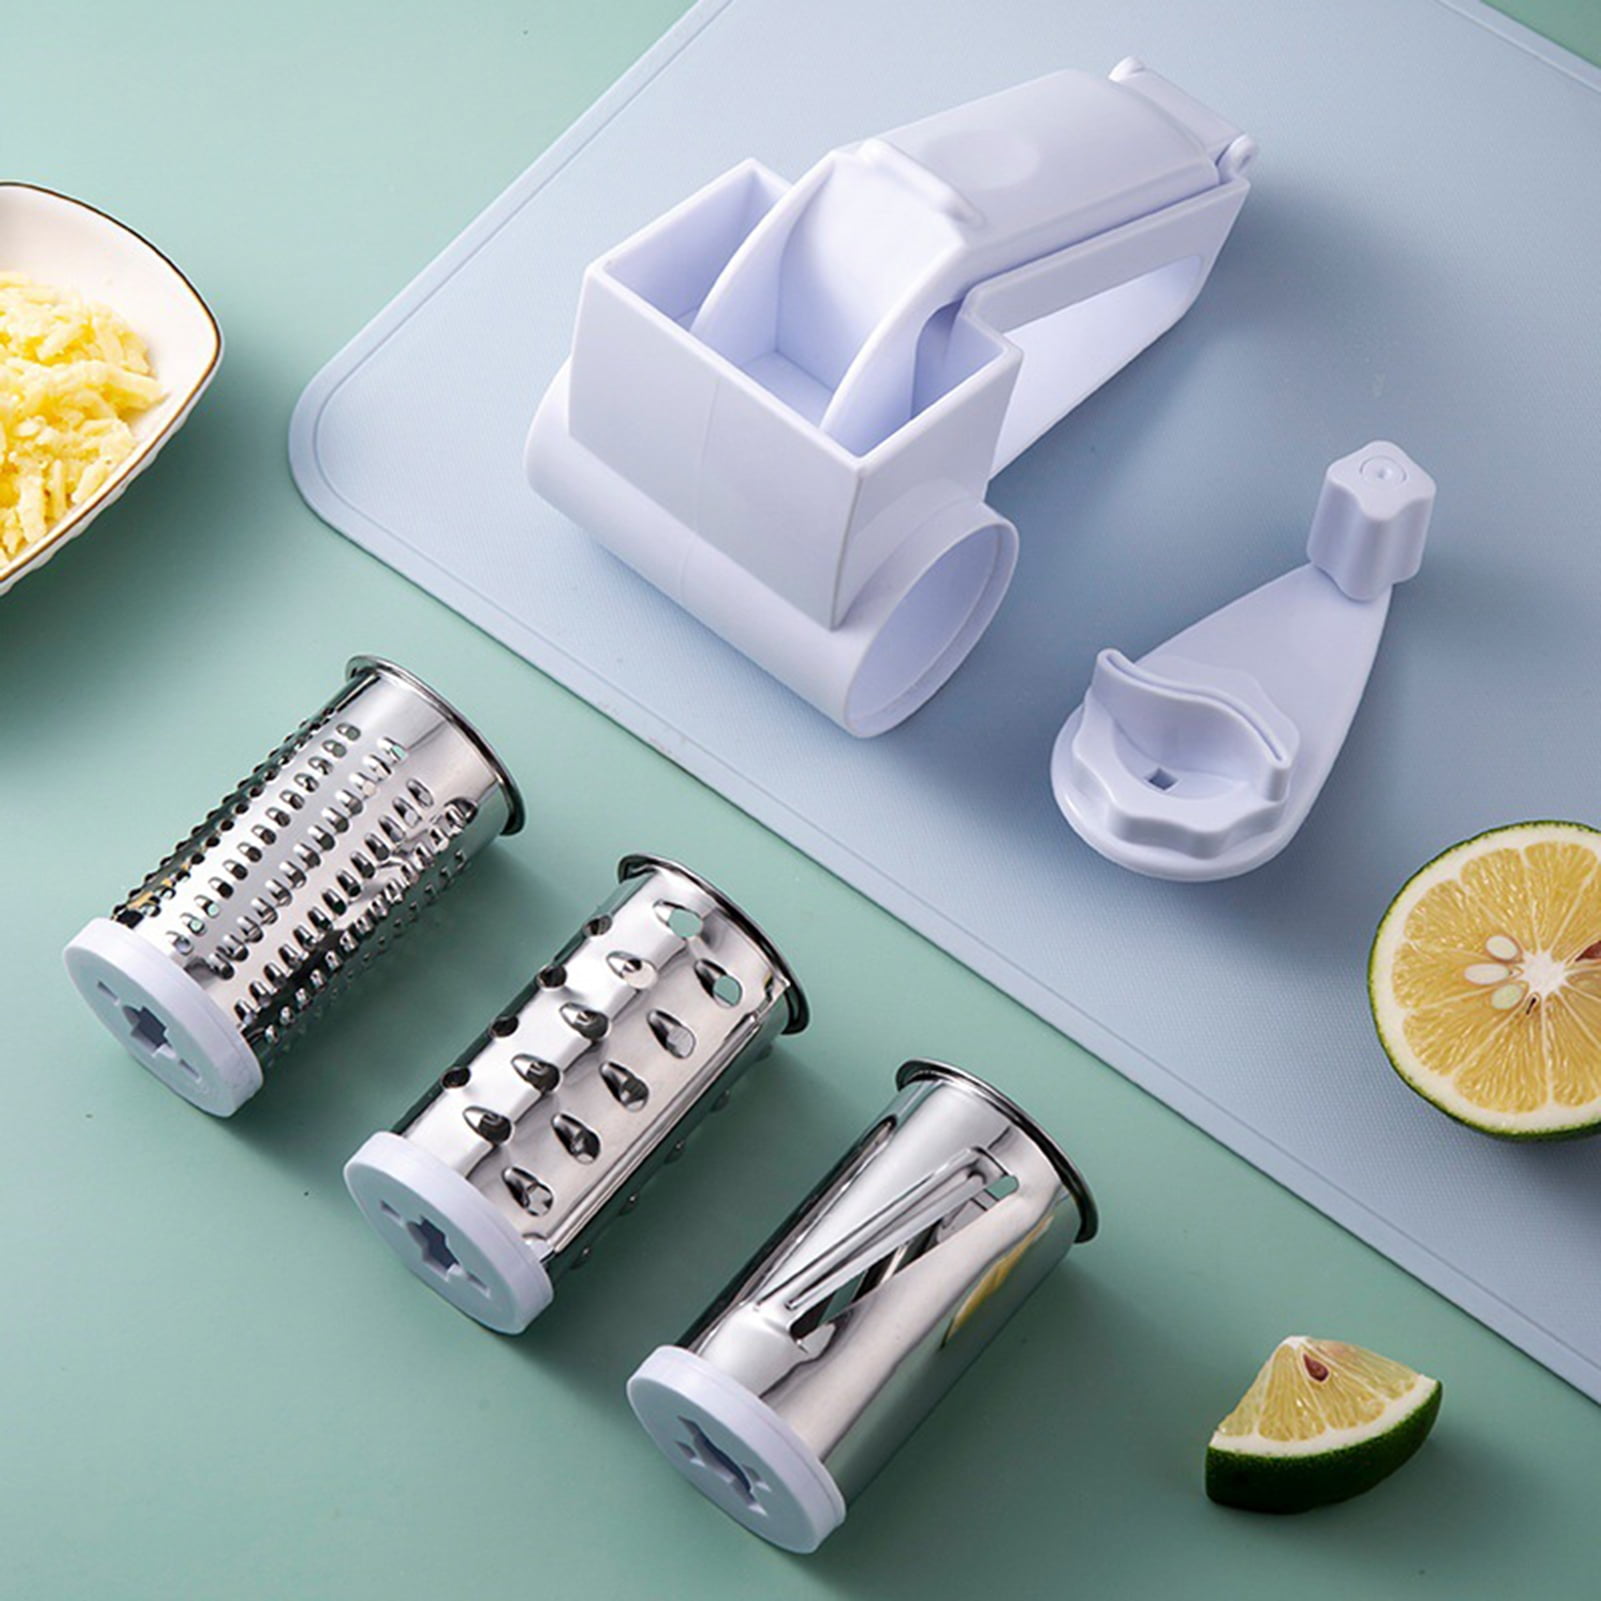  Cheese Grater with Handle, Parmesan Cheese Grater, Handheld Rotary  Cheese Grater, Olive Garden Cheese Grater with 2 Stainless Steel Drums for  Hard Cheese, Chocolate, Nuts: Home & Kitchen